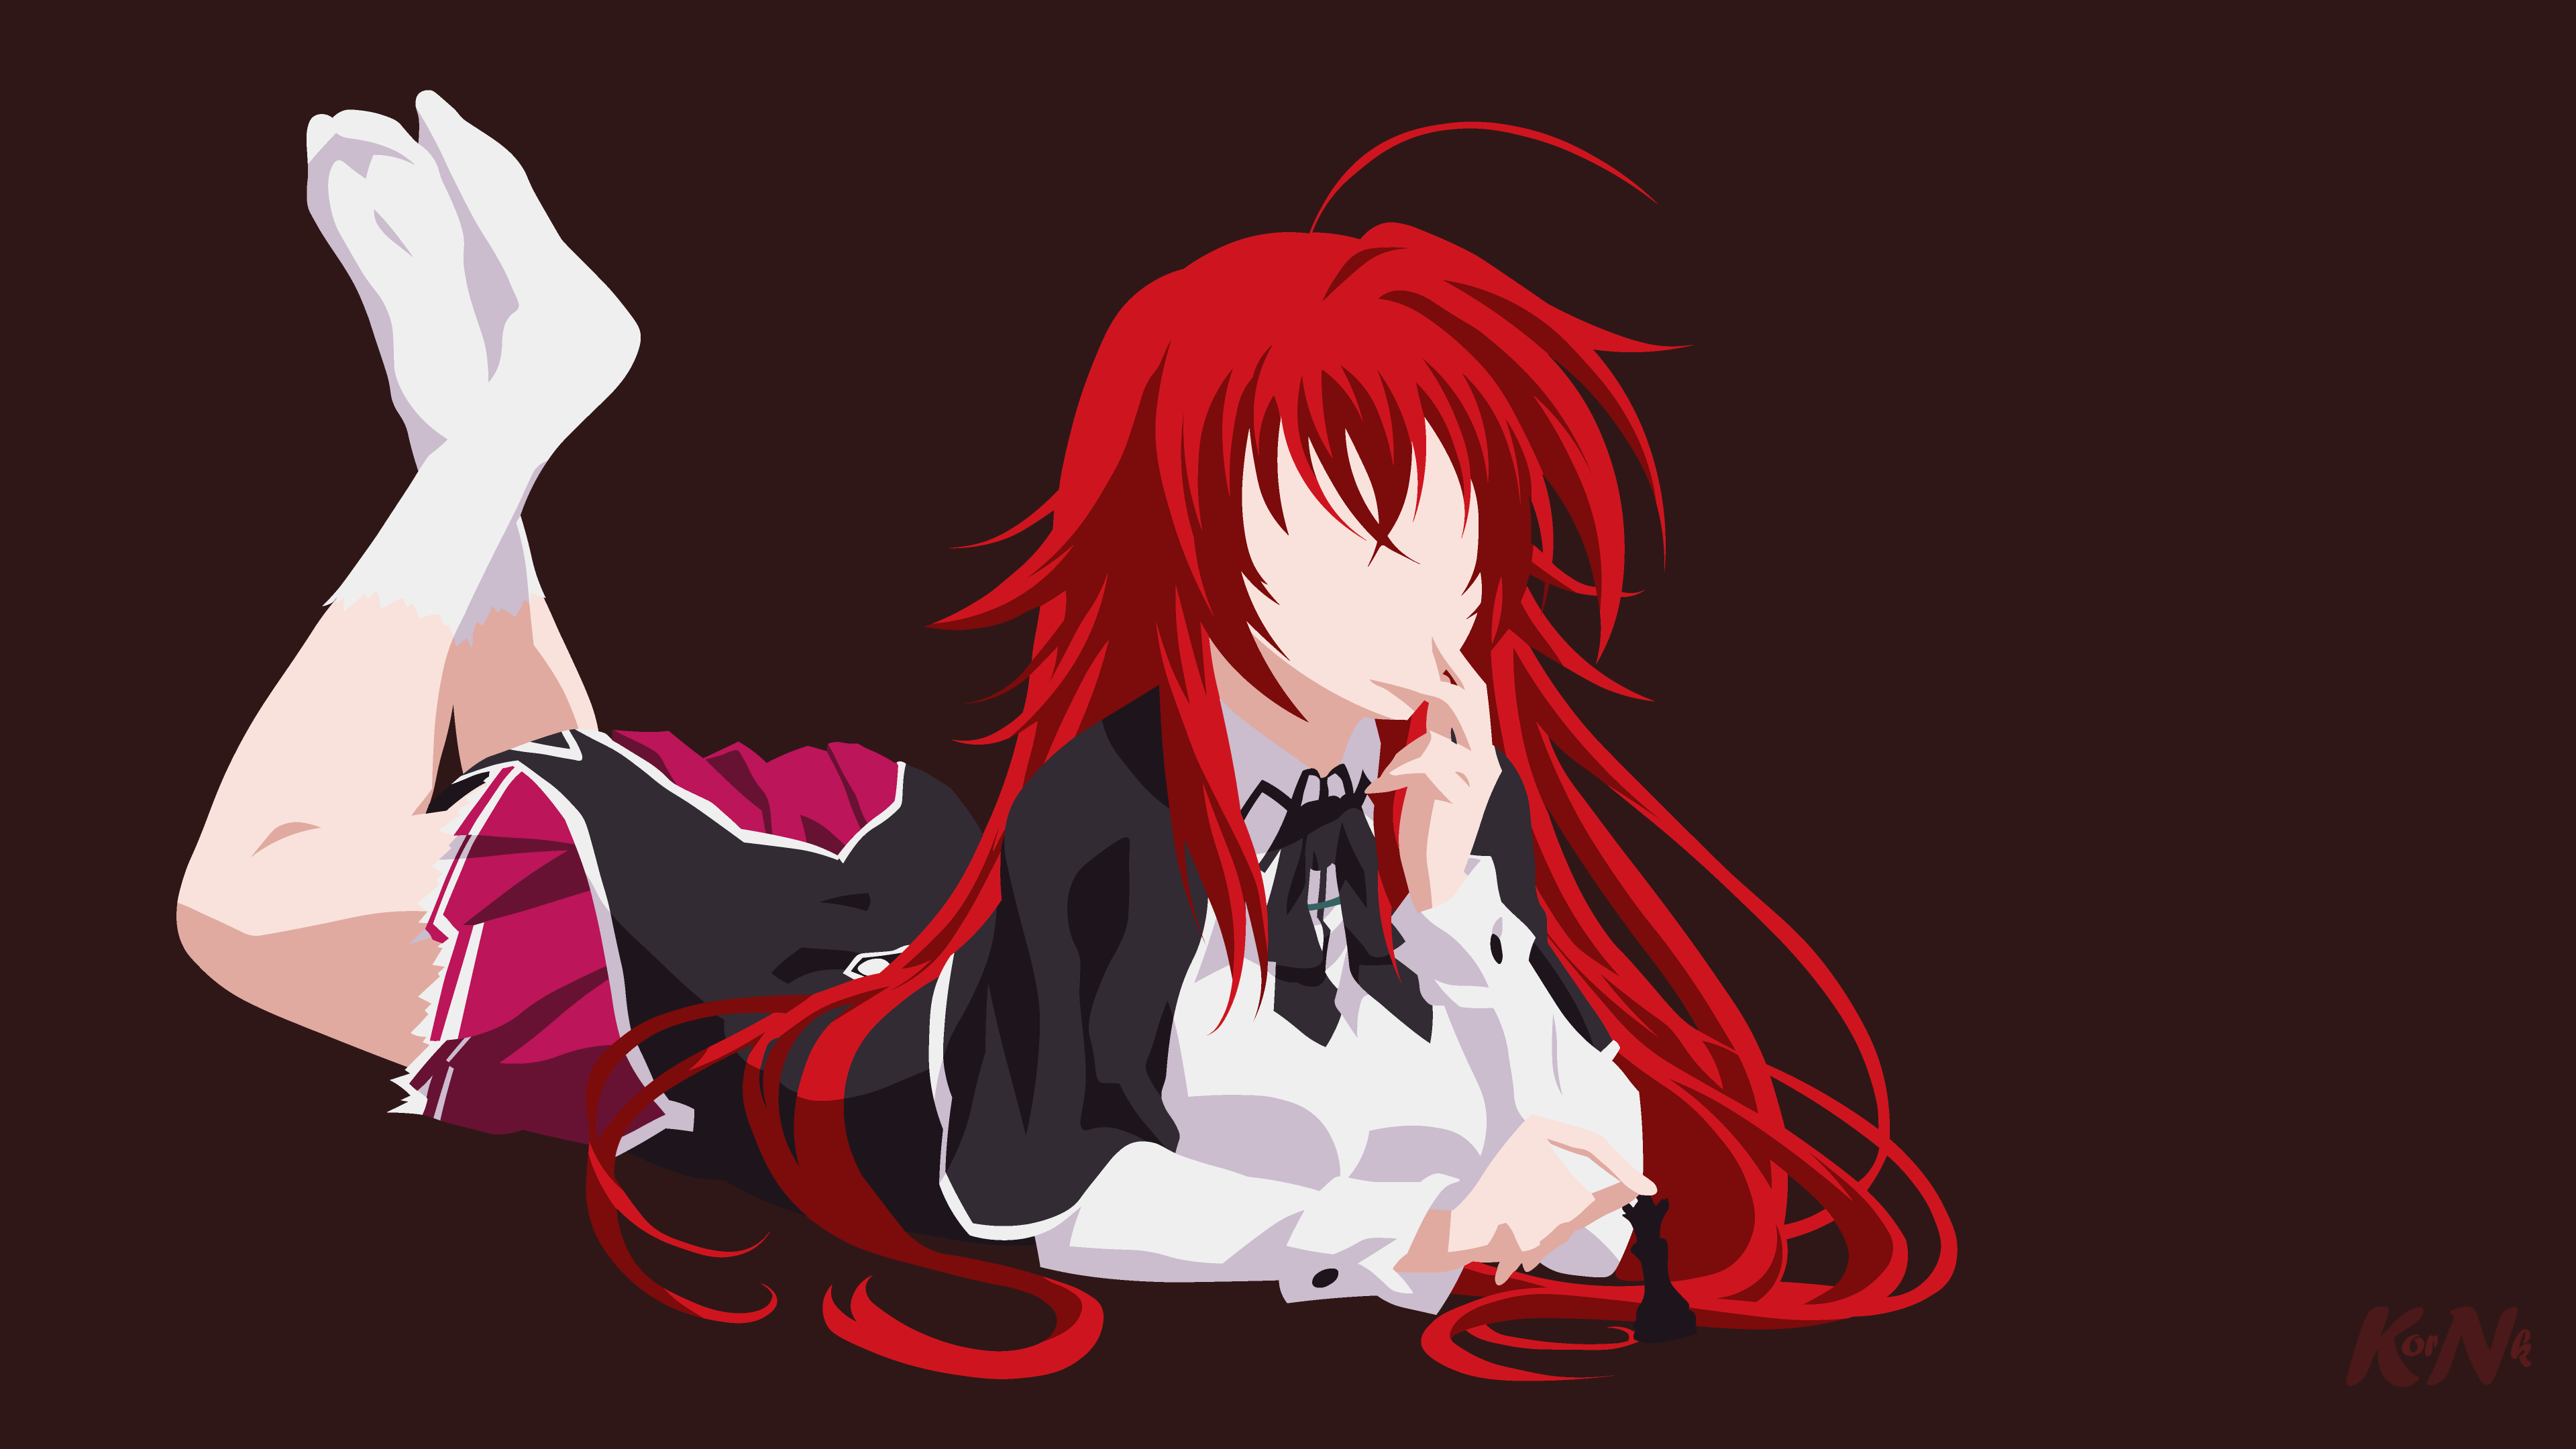 High School DxD 2017 Wallpapers - Wallpaper Cave